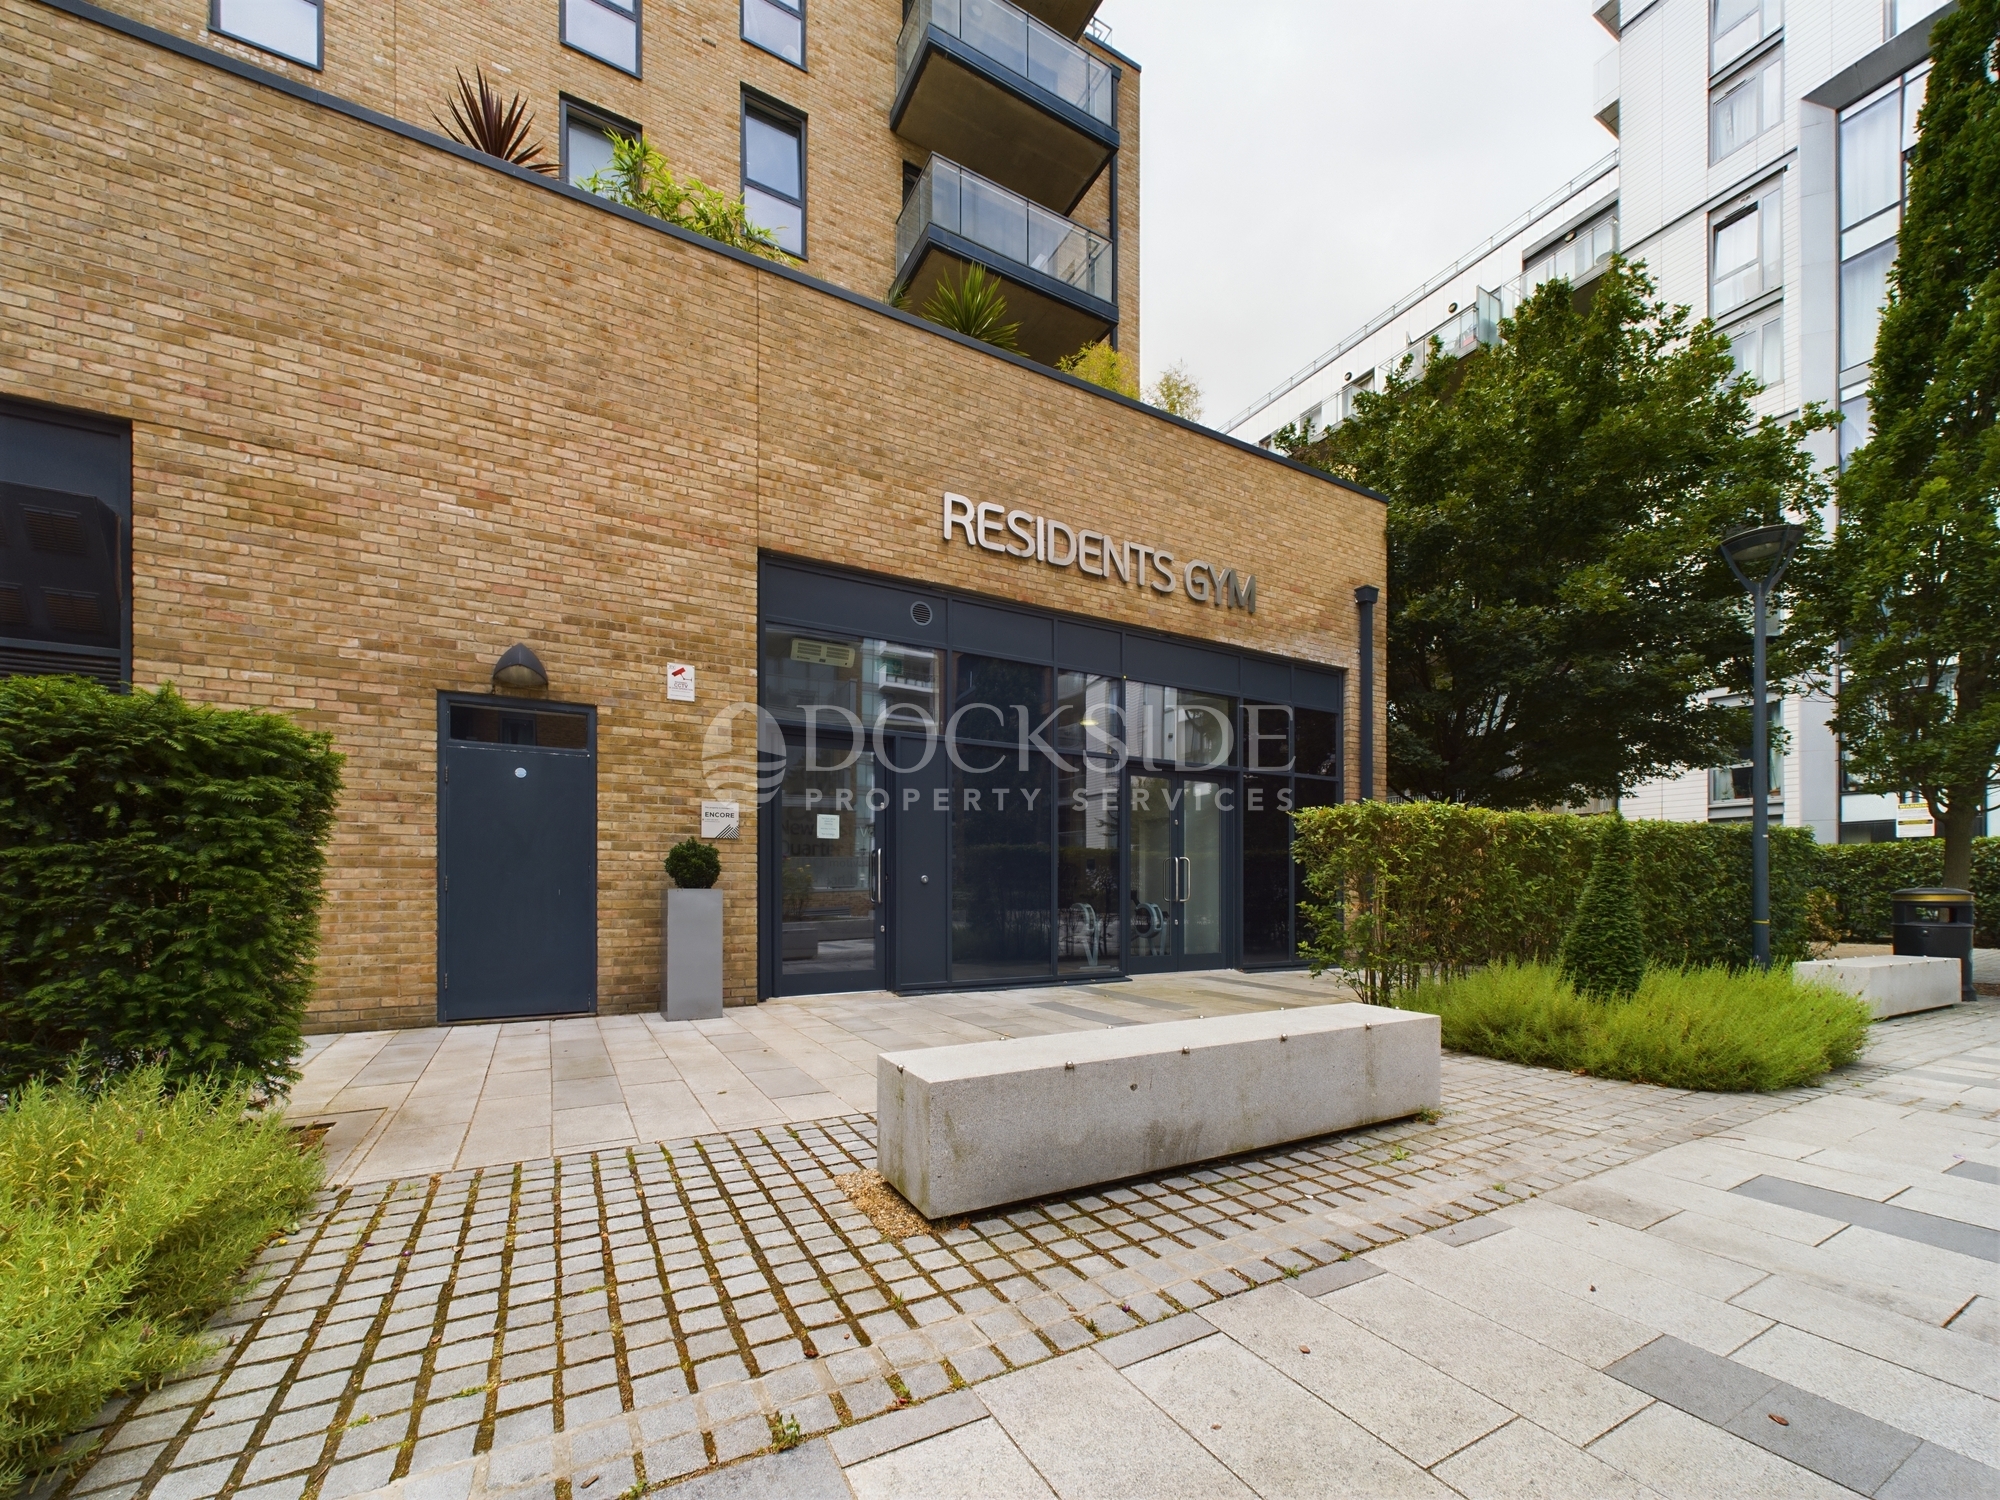 1 bed to rent in Casson Apartments, London, E14 